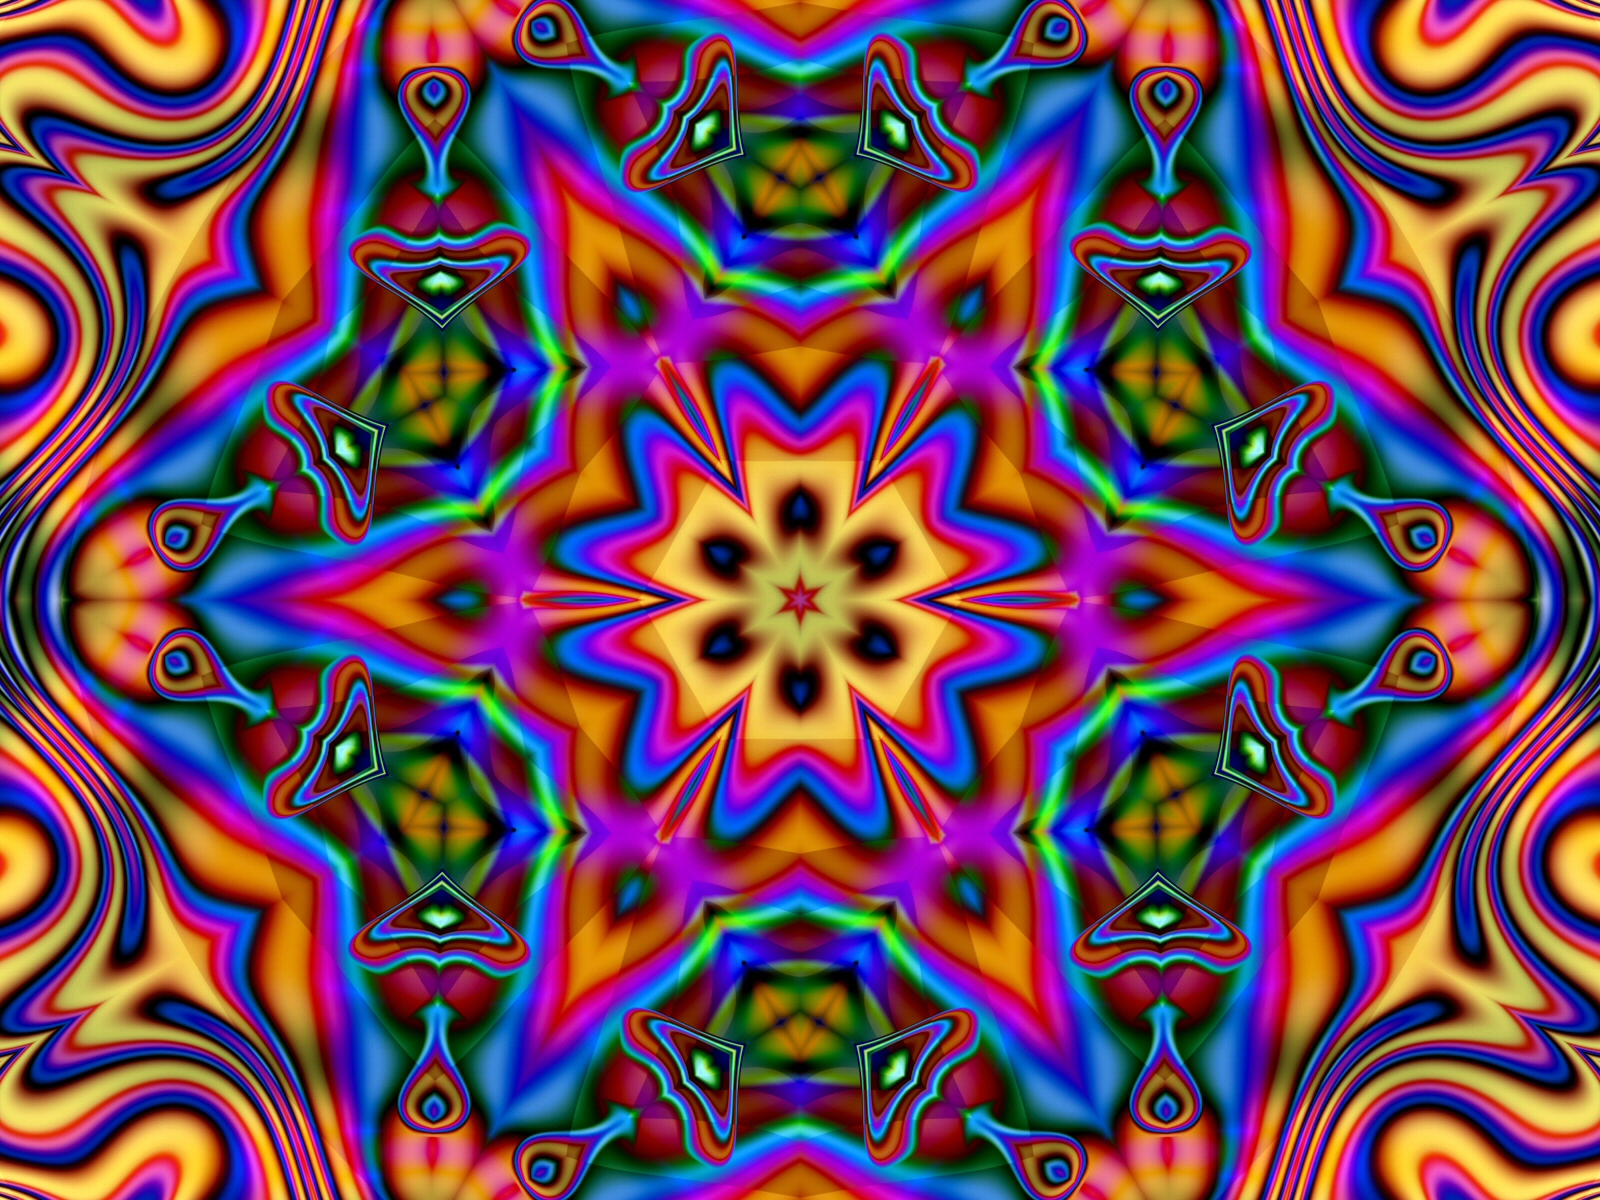 Psychedelic Vision By Thelma1